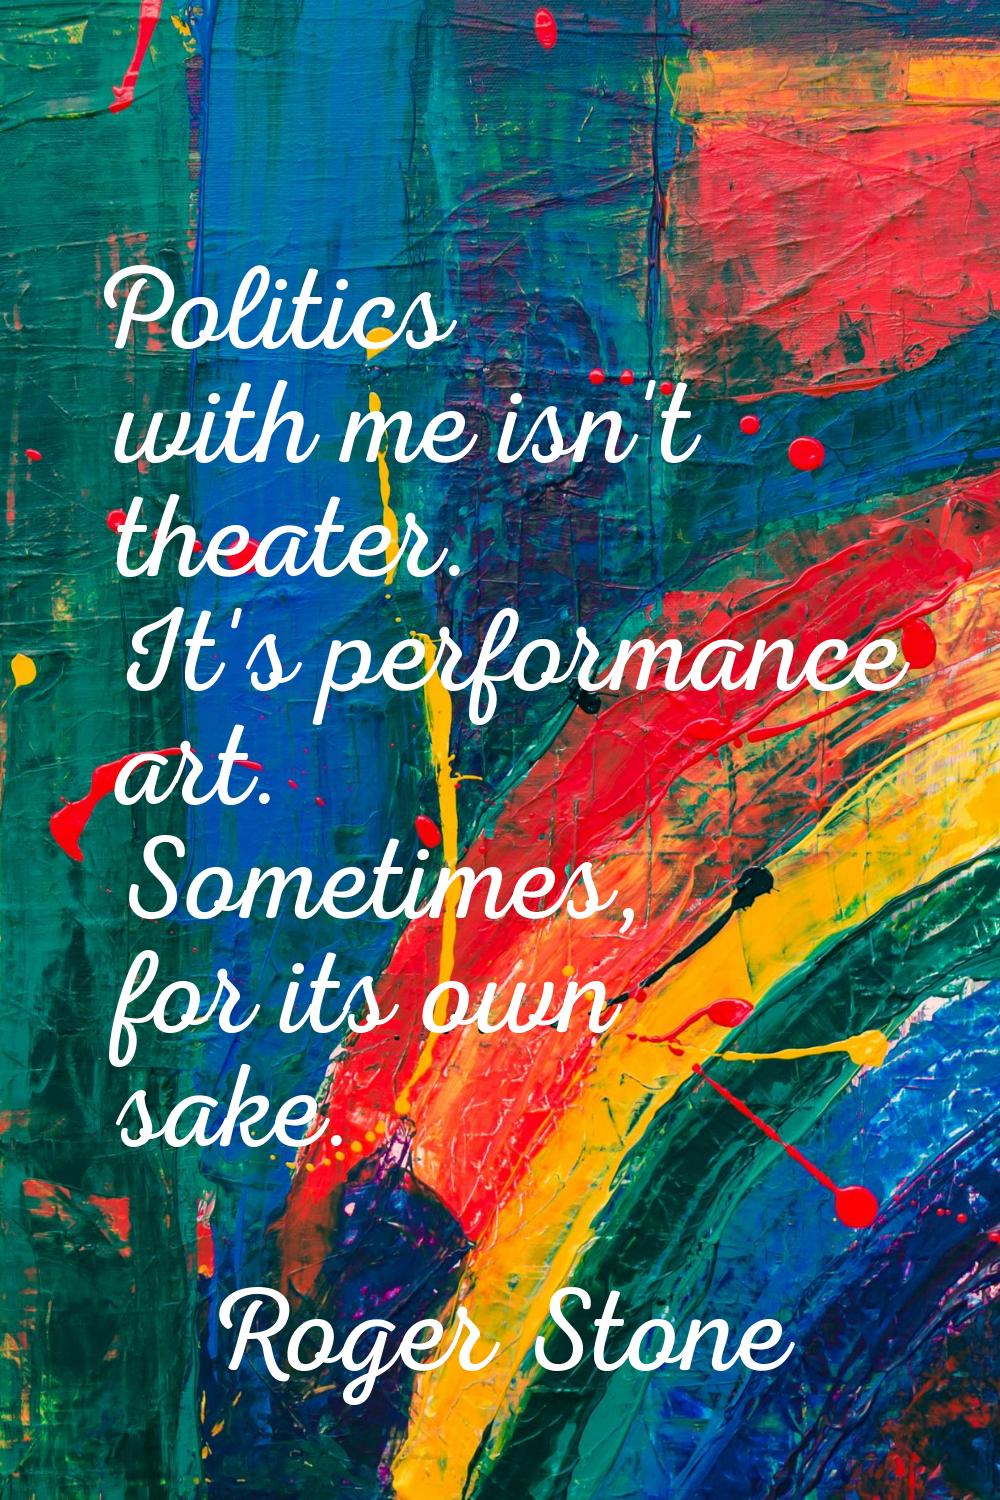 Politics with me isn't theater. It's performance art. Sometimes, for its own sake.